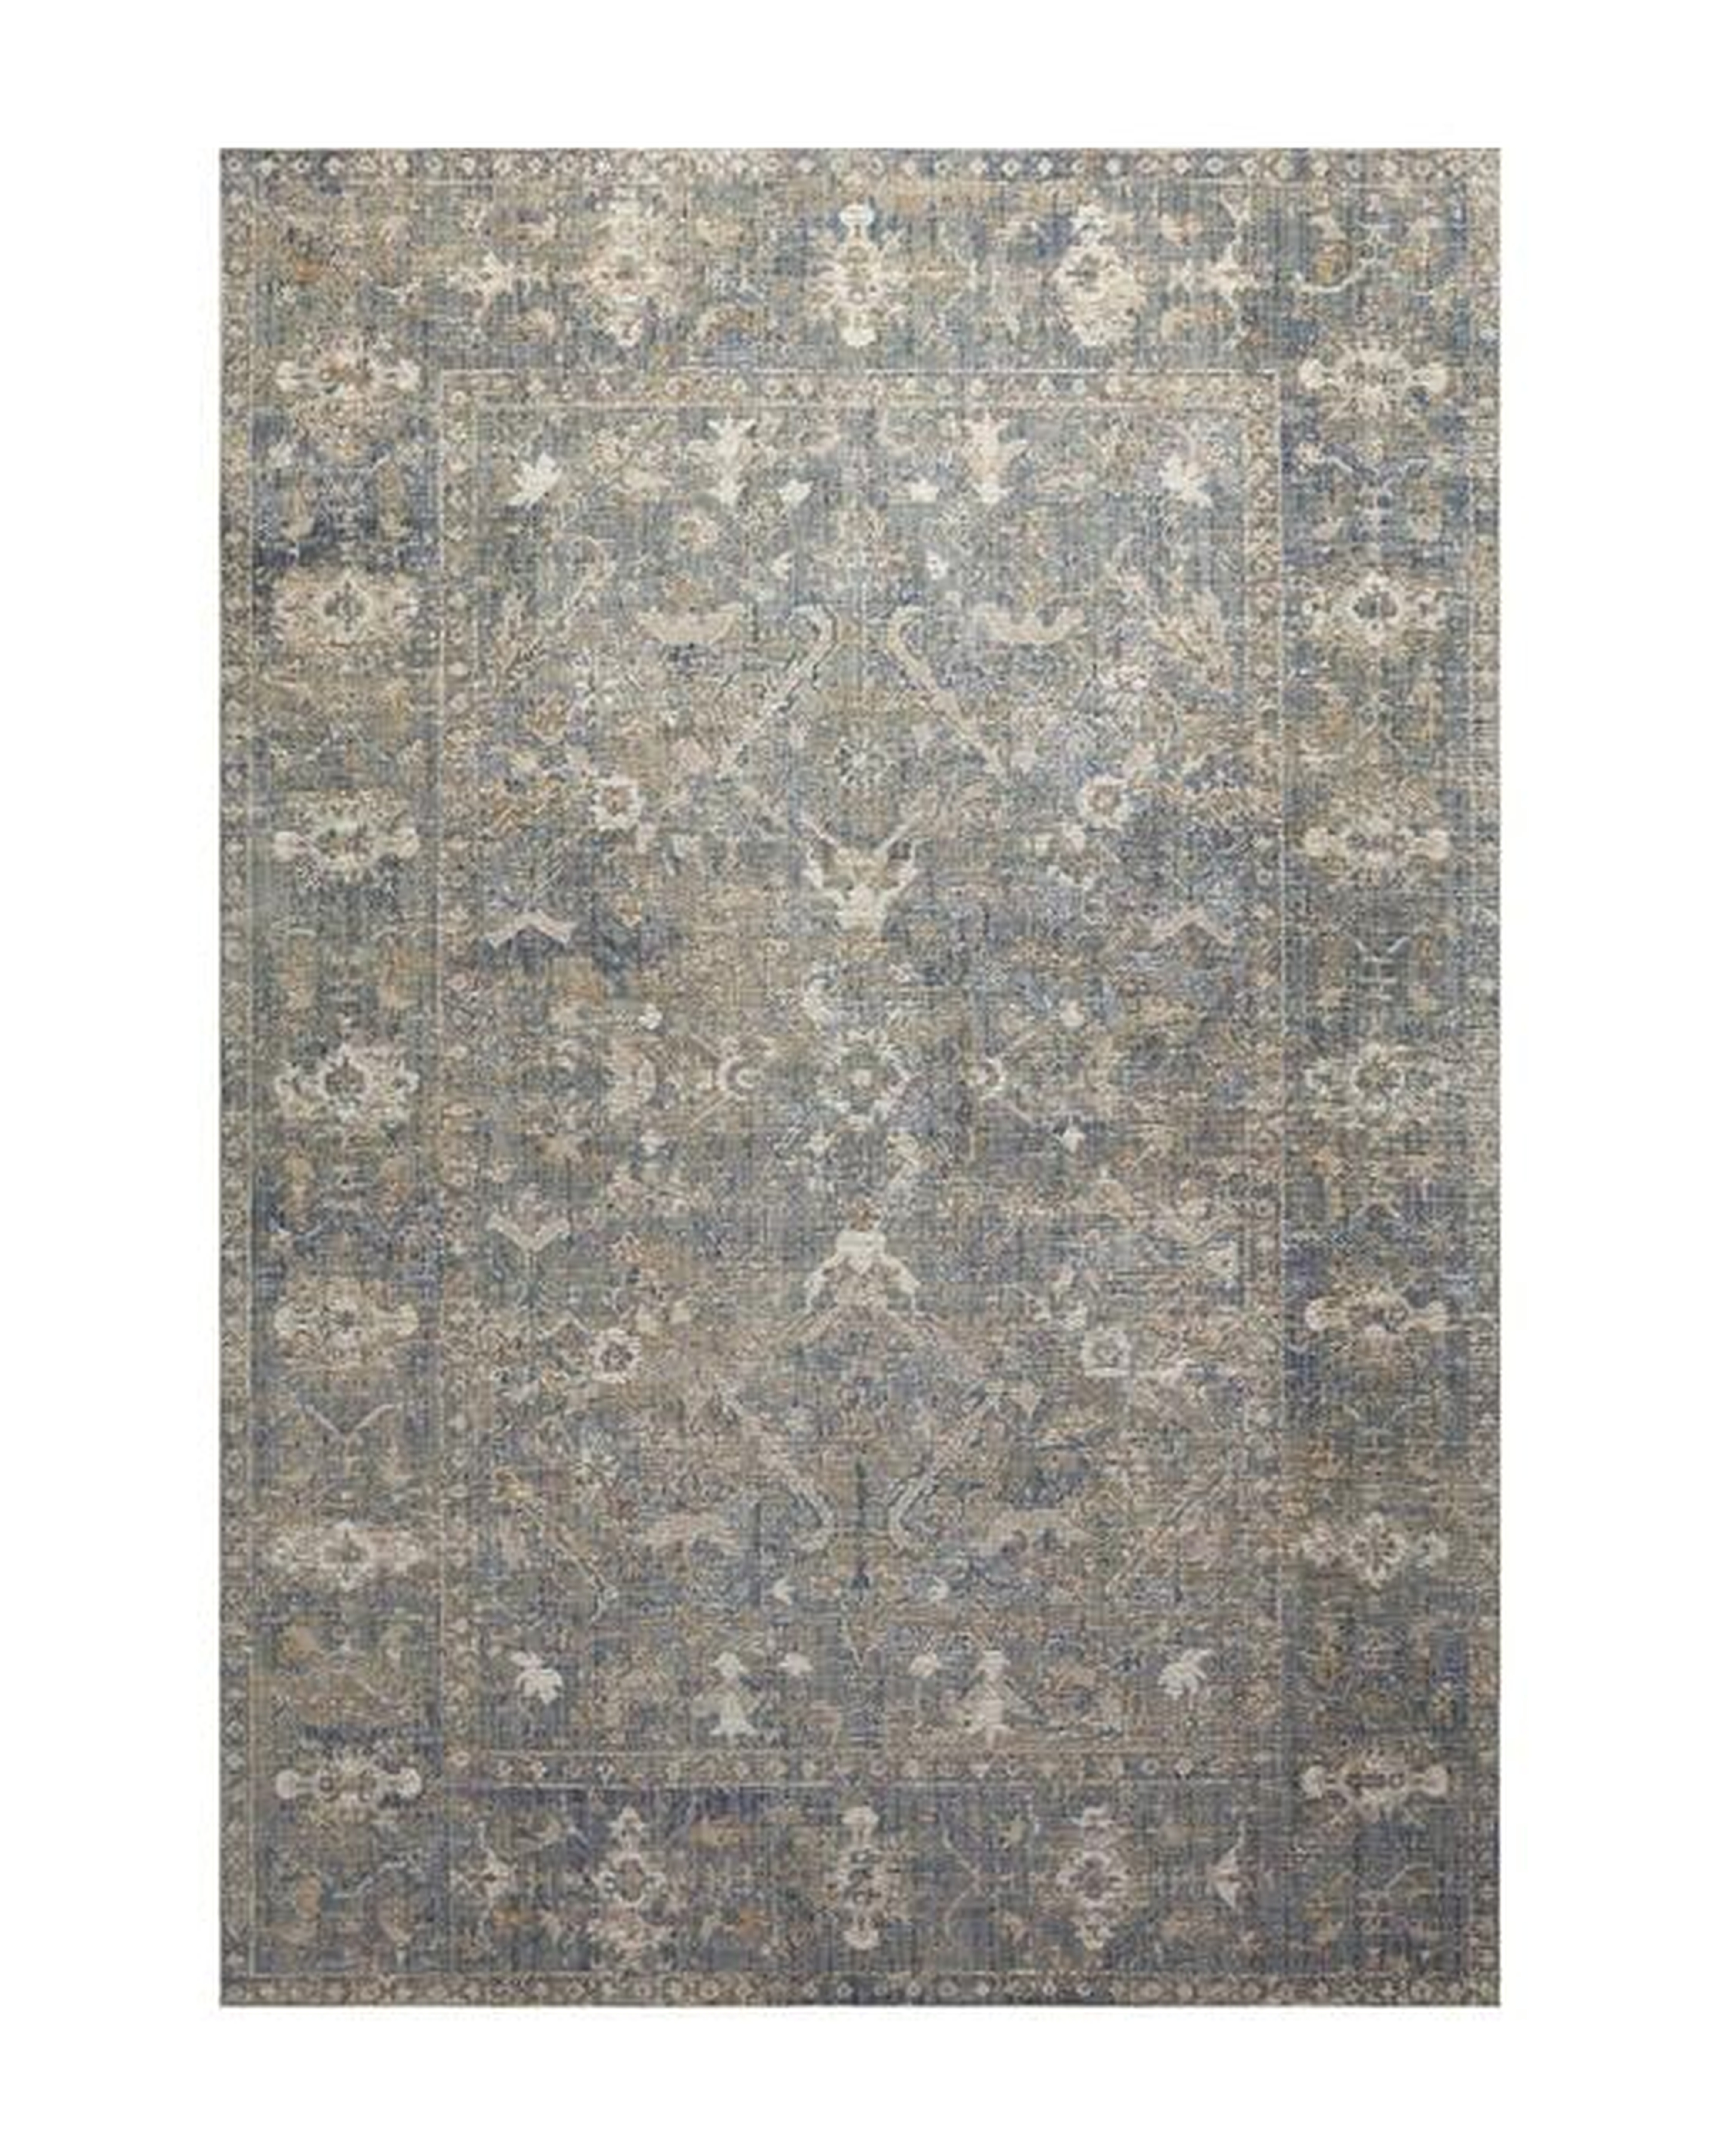 Rosemarie Collection No. 3 Rug 9'x12' - McGee & Co.